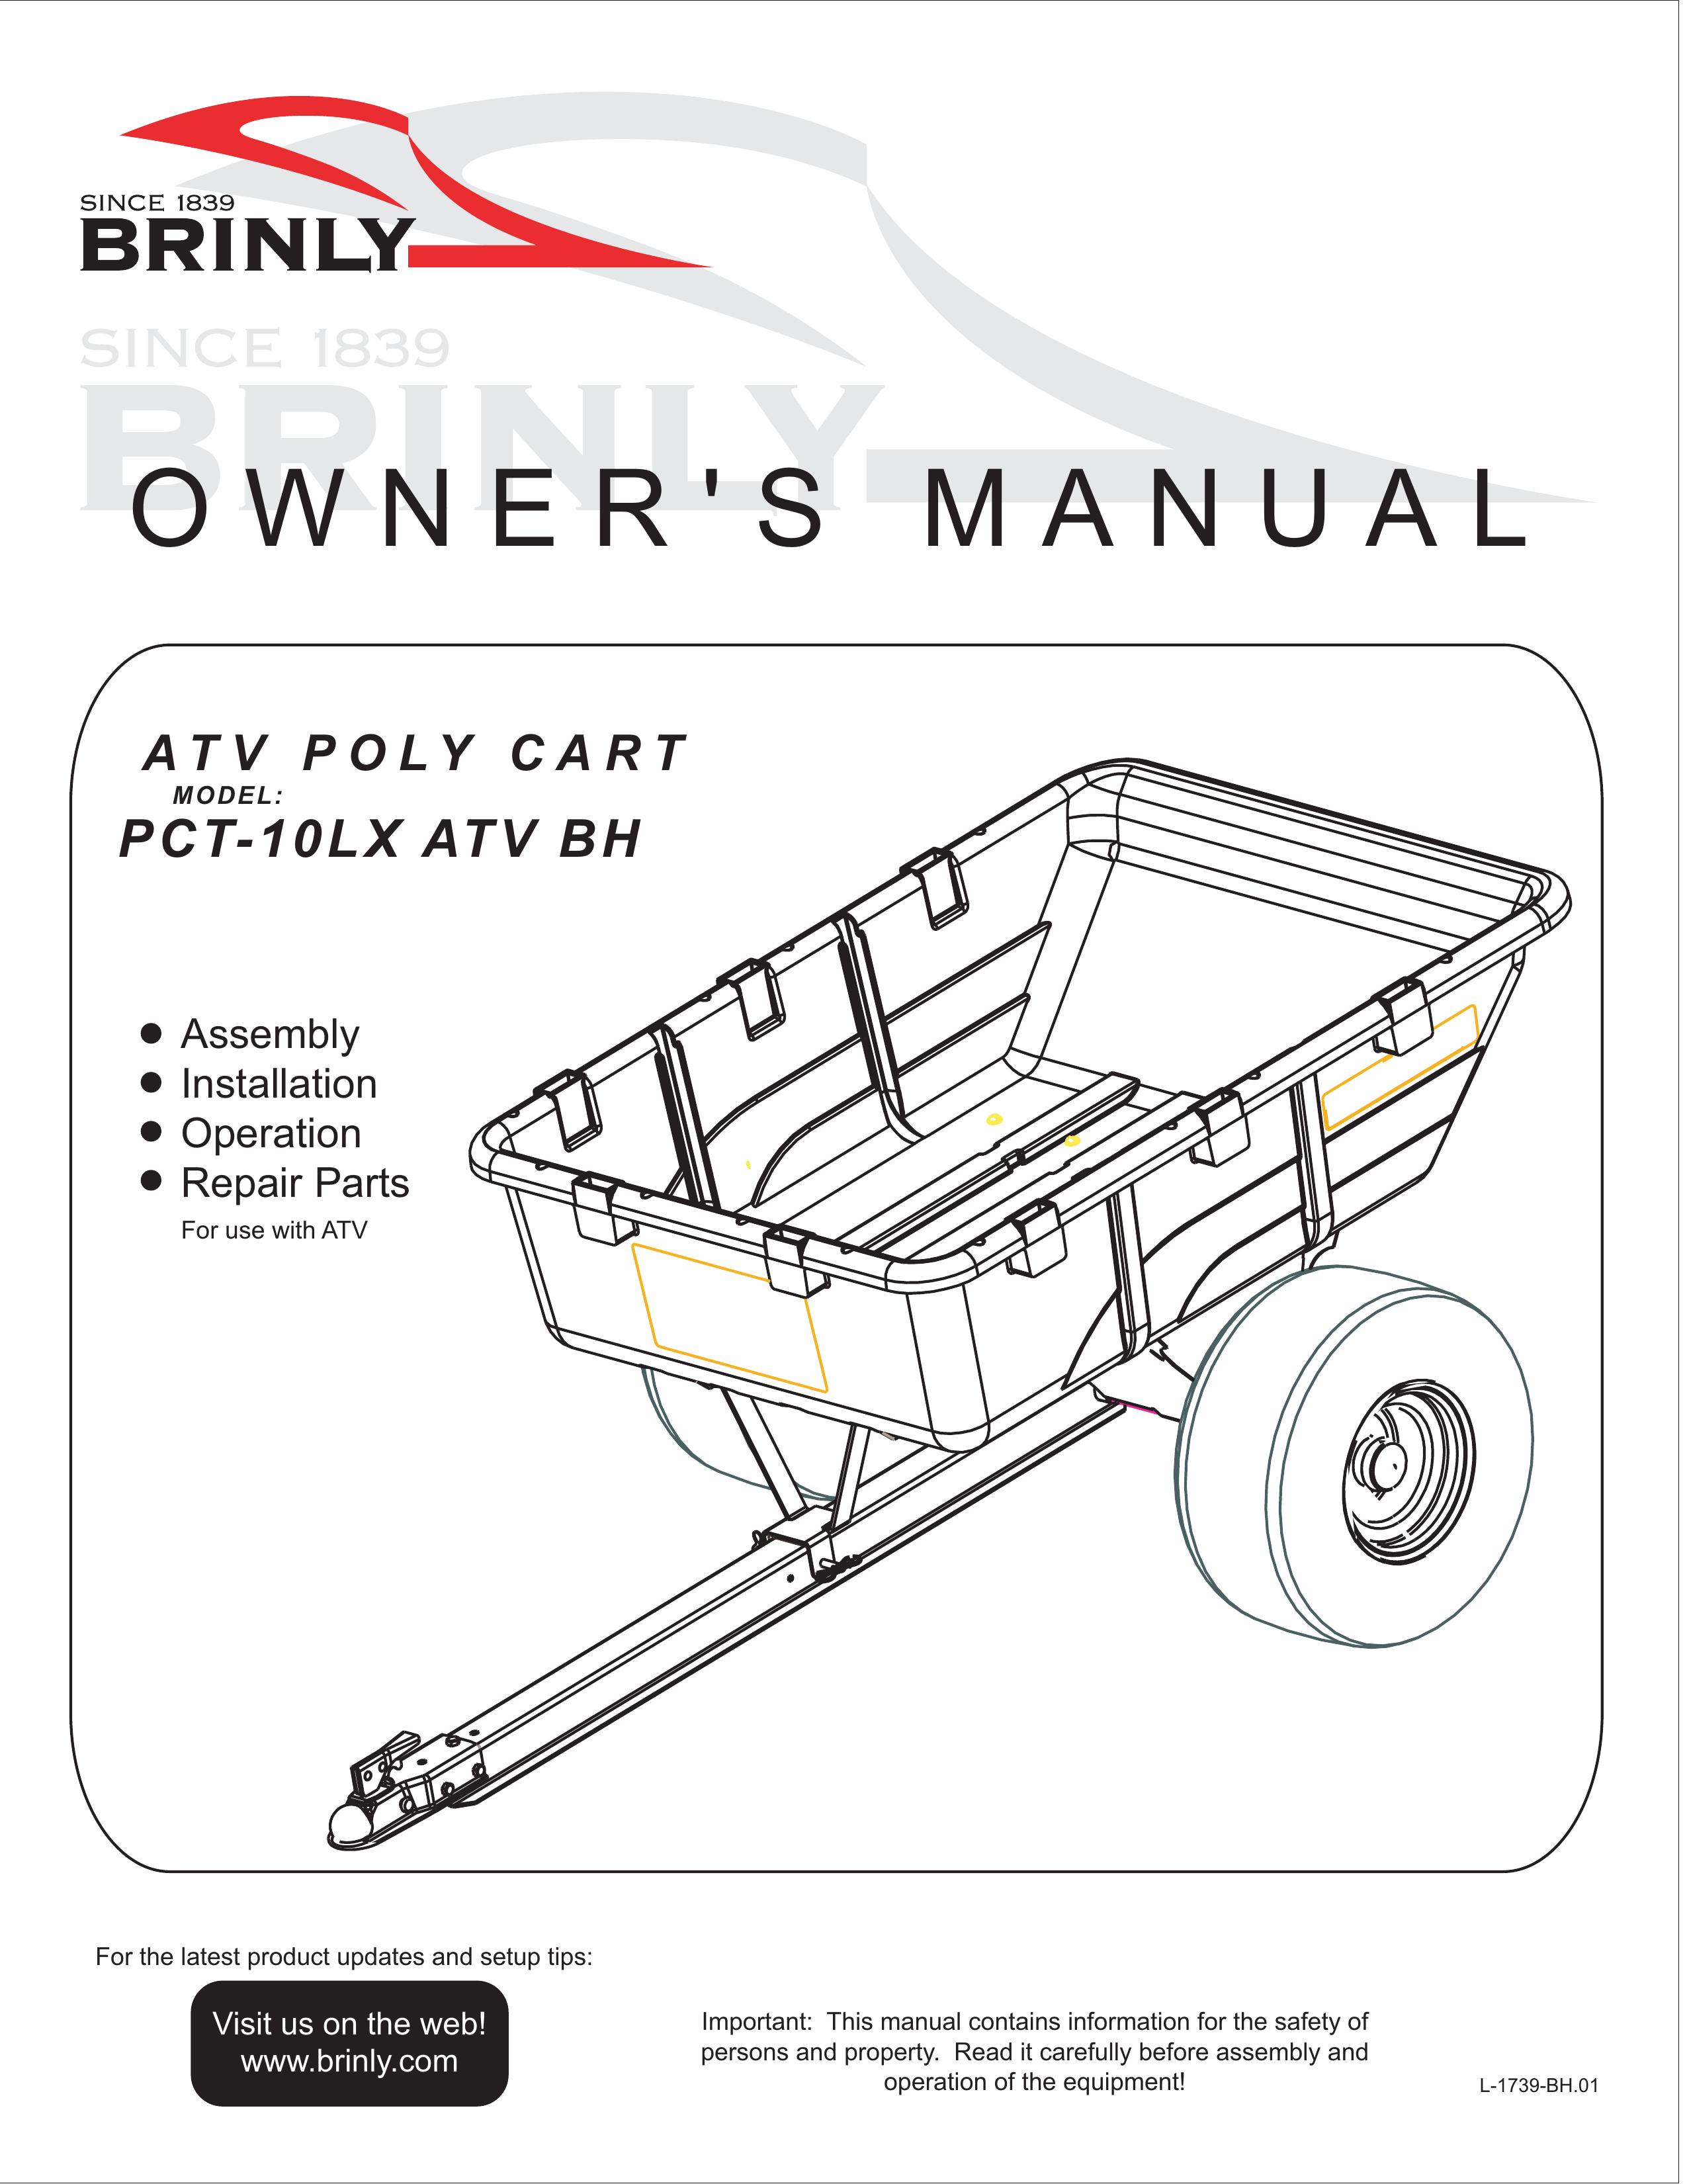 Brinly-Hardy PCT-10LX ATV BH Lawn Mower Accessory User Manual